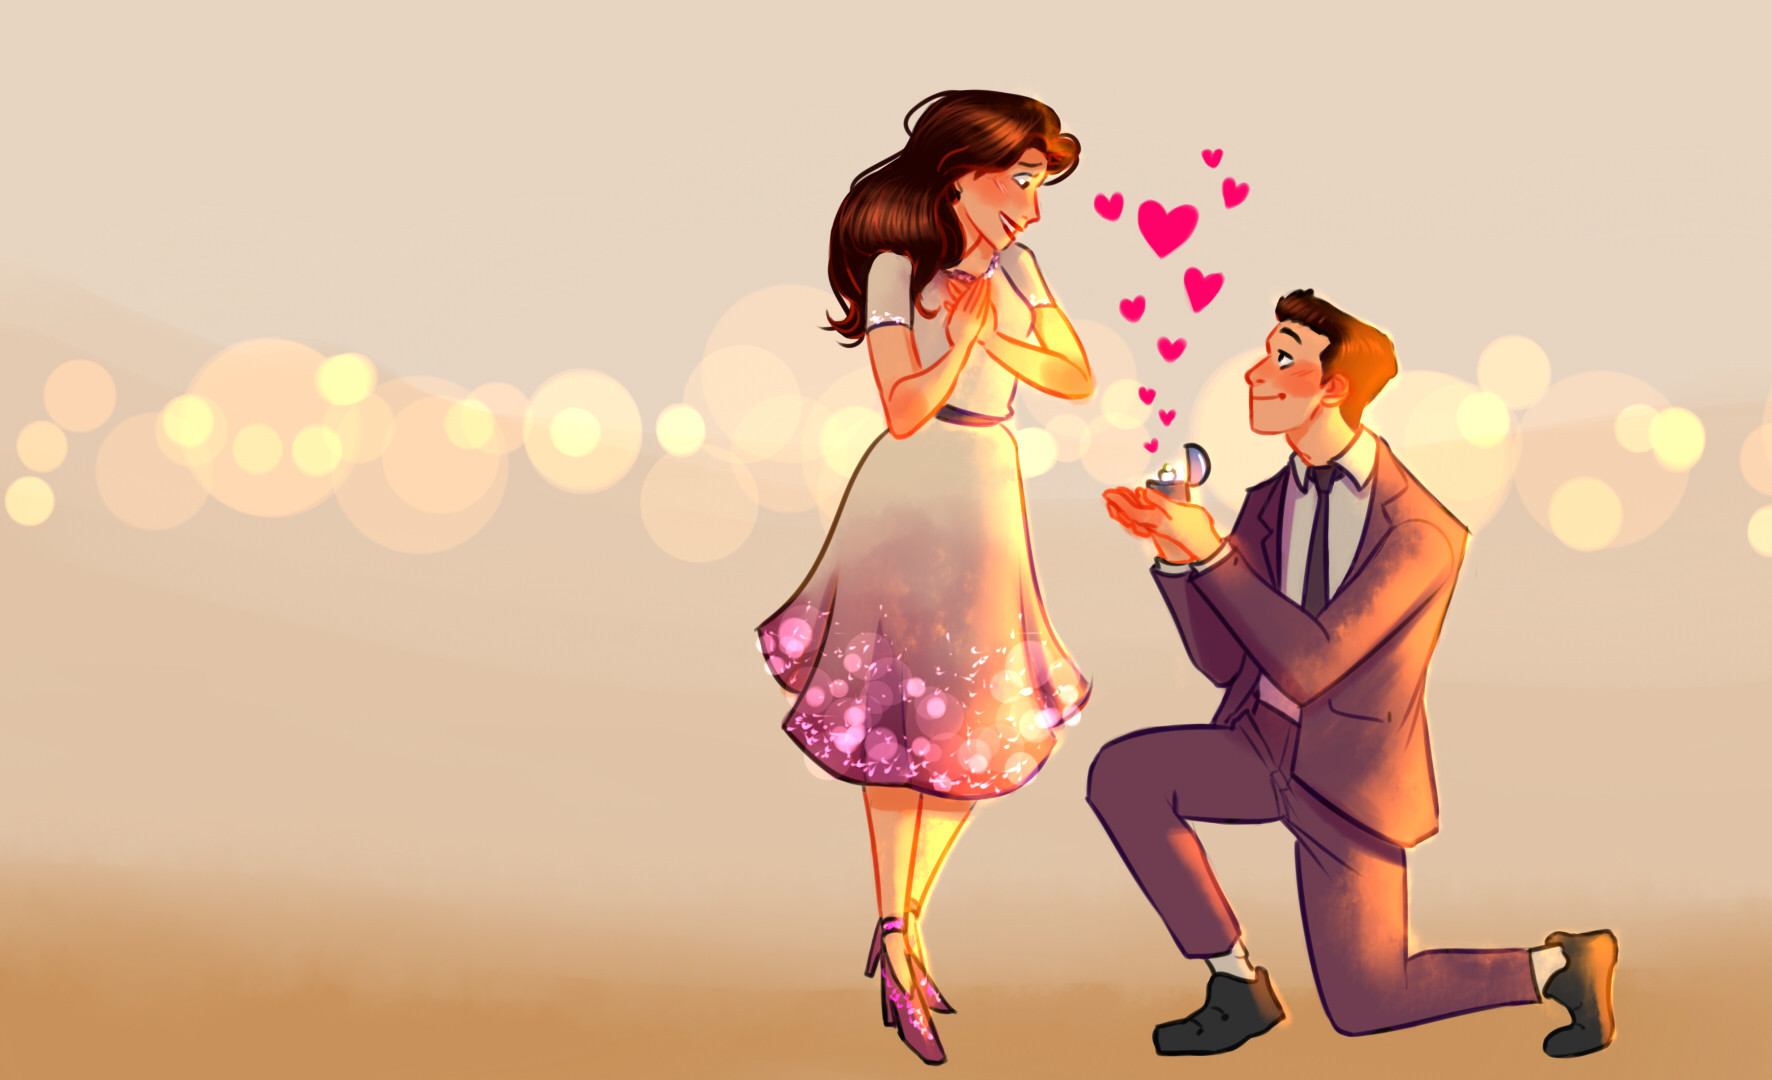 Will You Marry Me Illustration HD Wallpaper